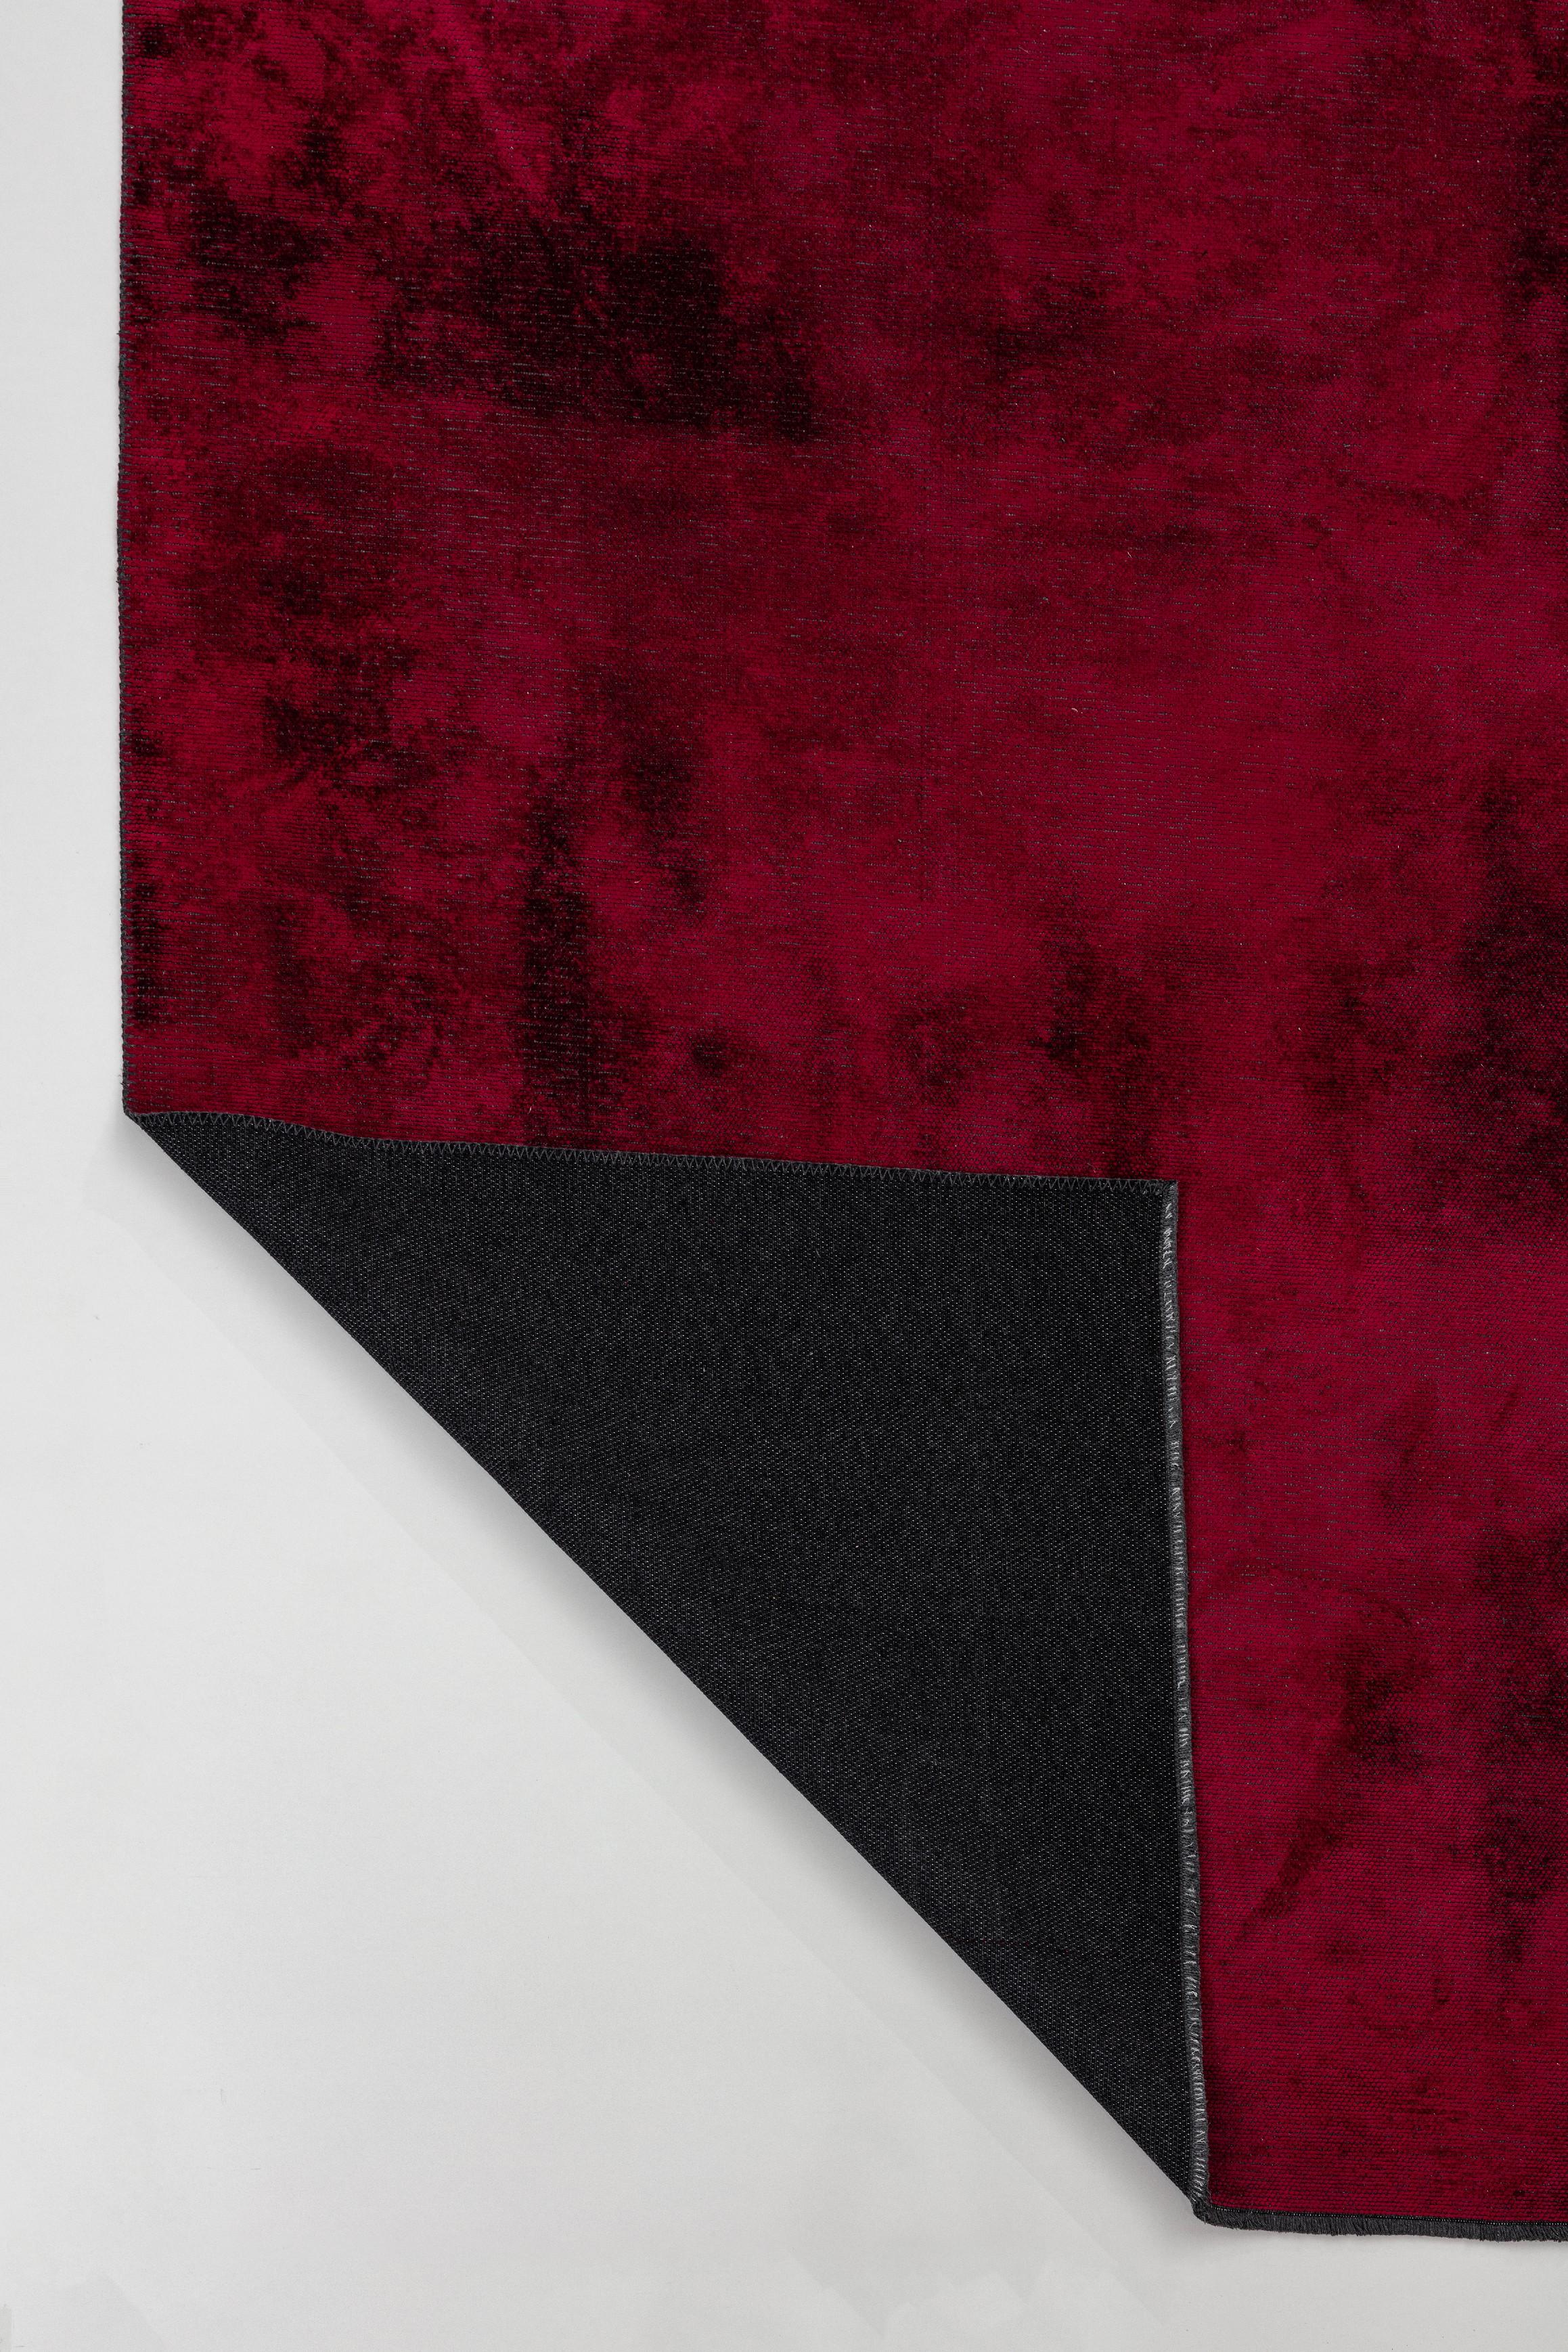 For Sale:  (Red) Modern Solid Color Luxury Area Rug 4